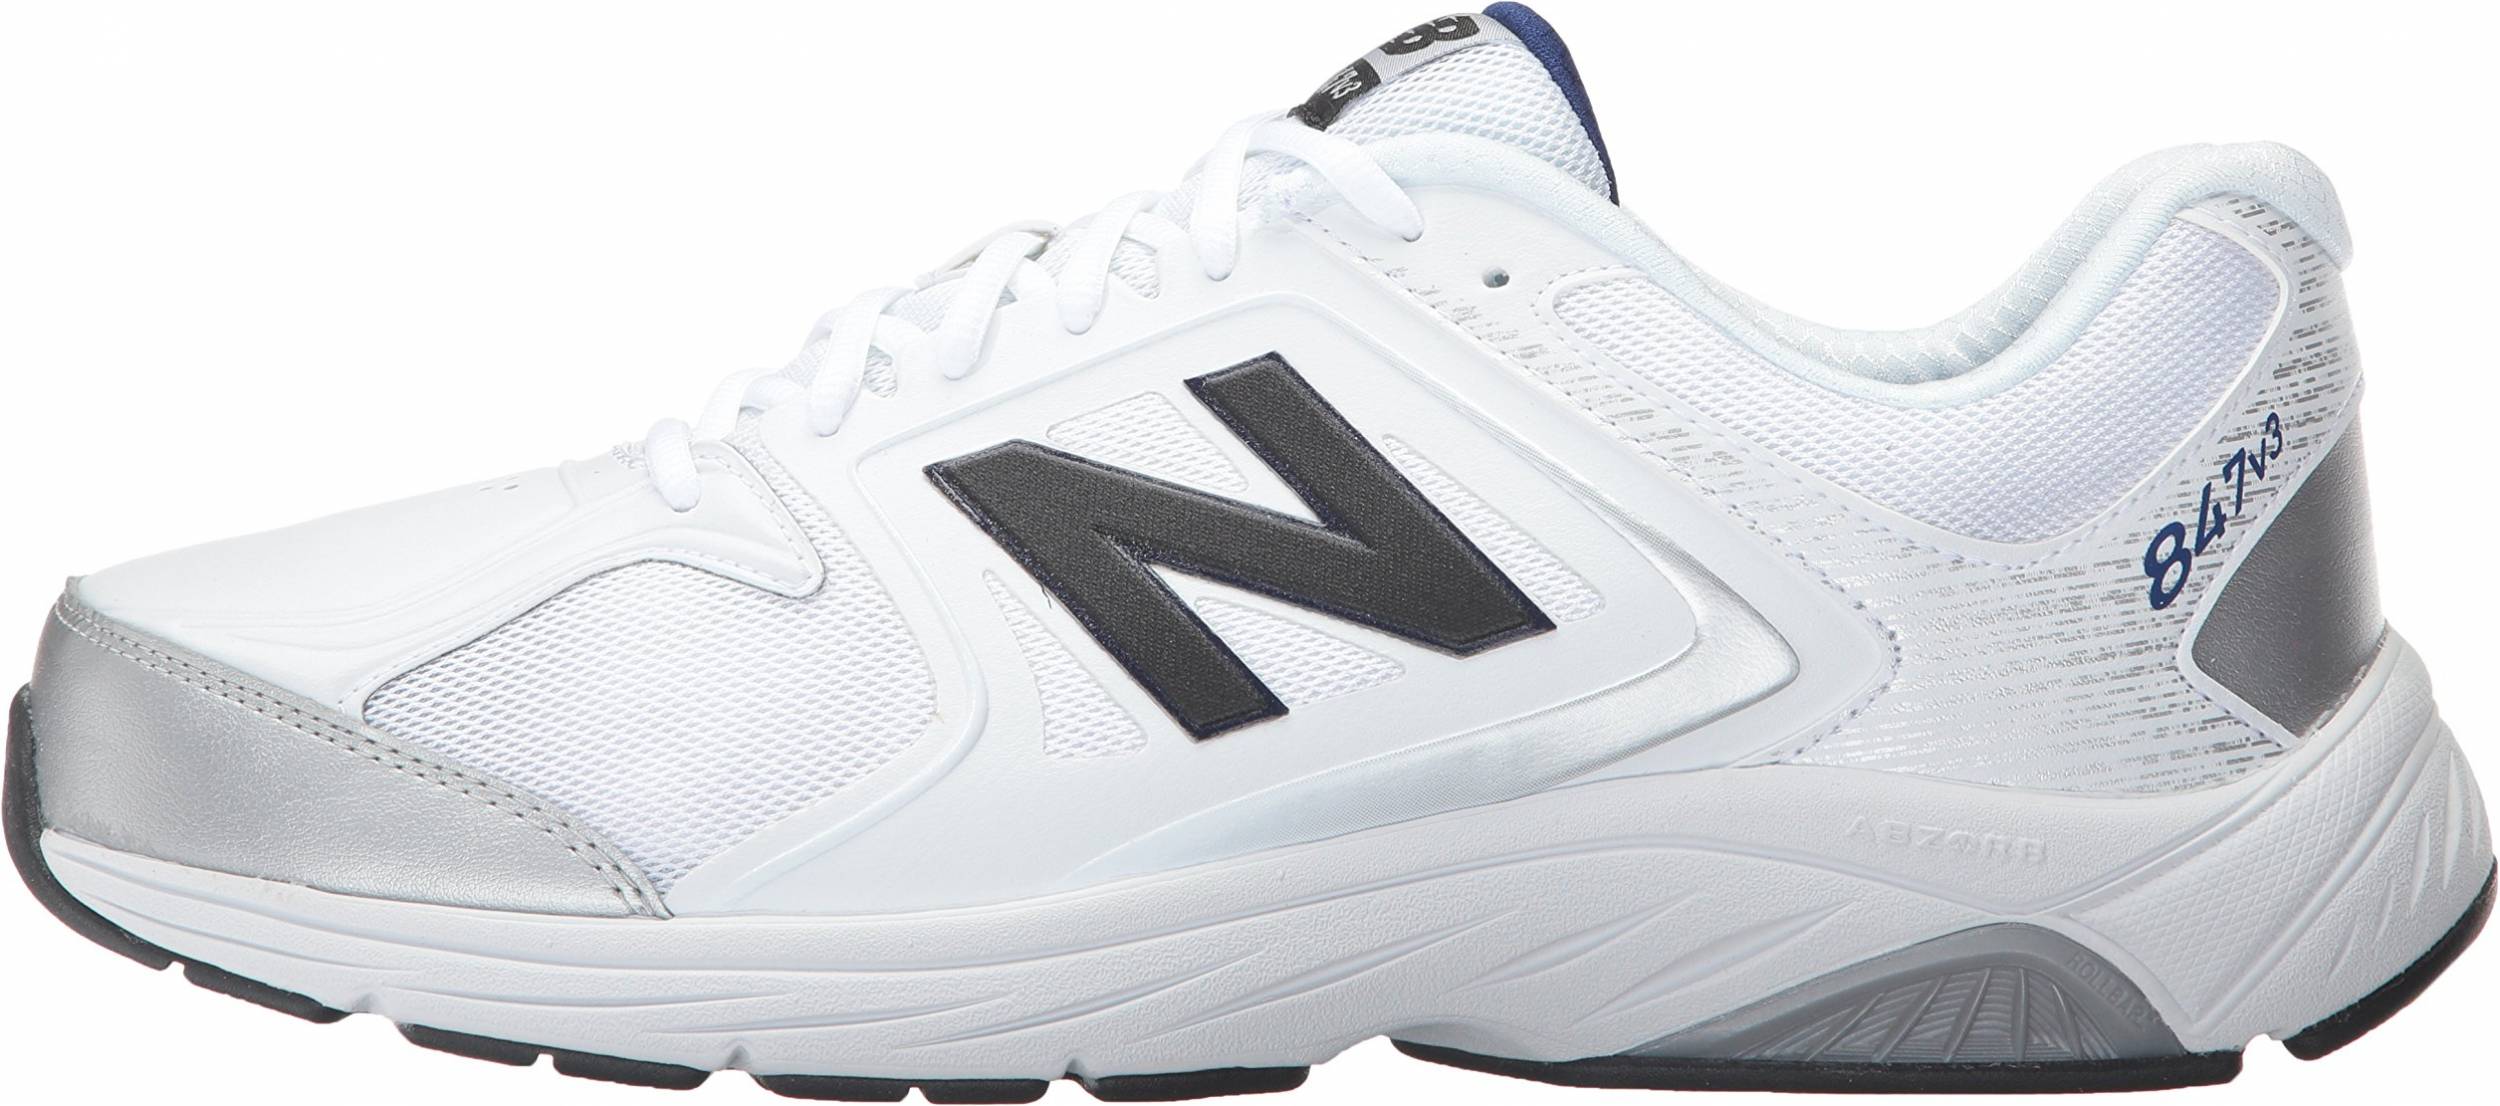 Only $79 + Review of New Balance 847 v3 